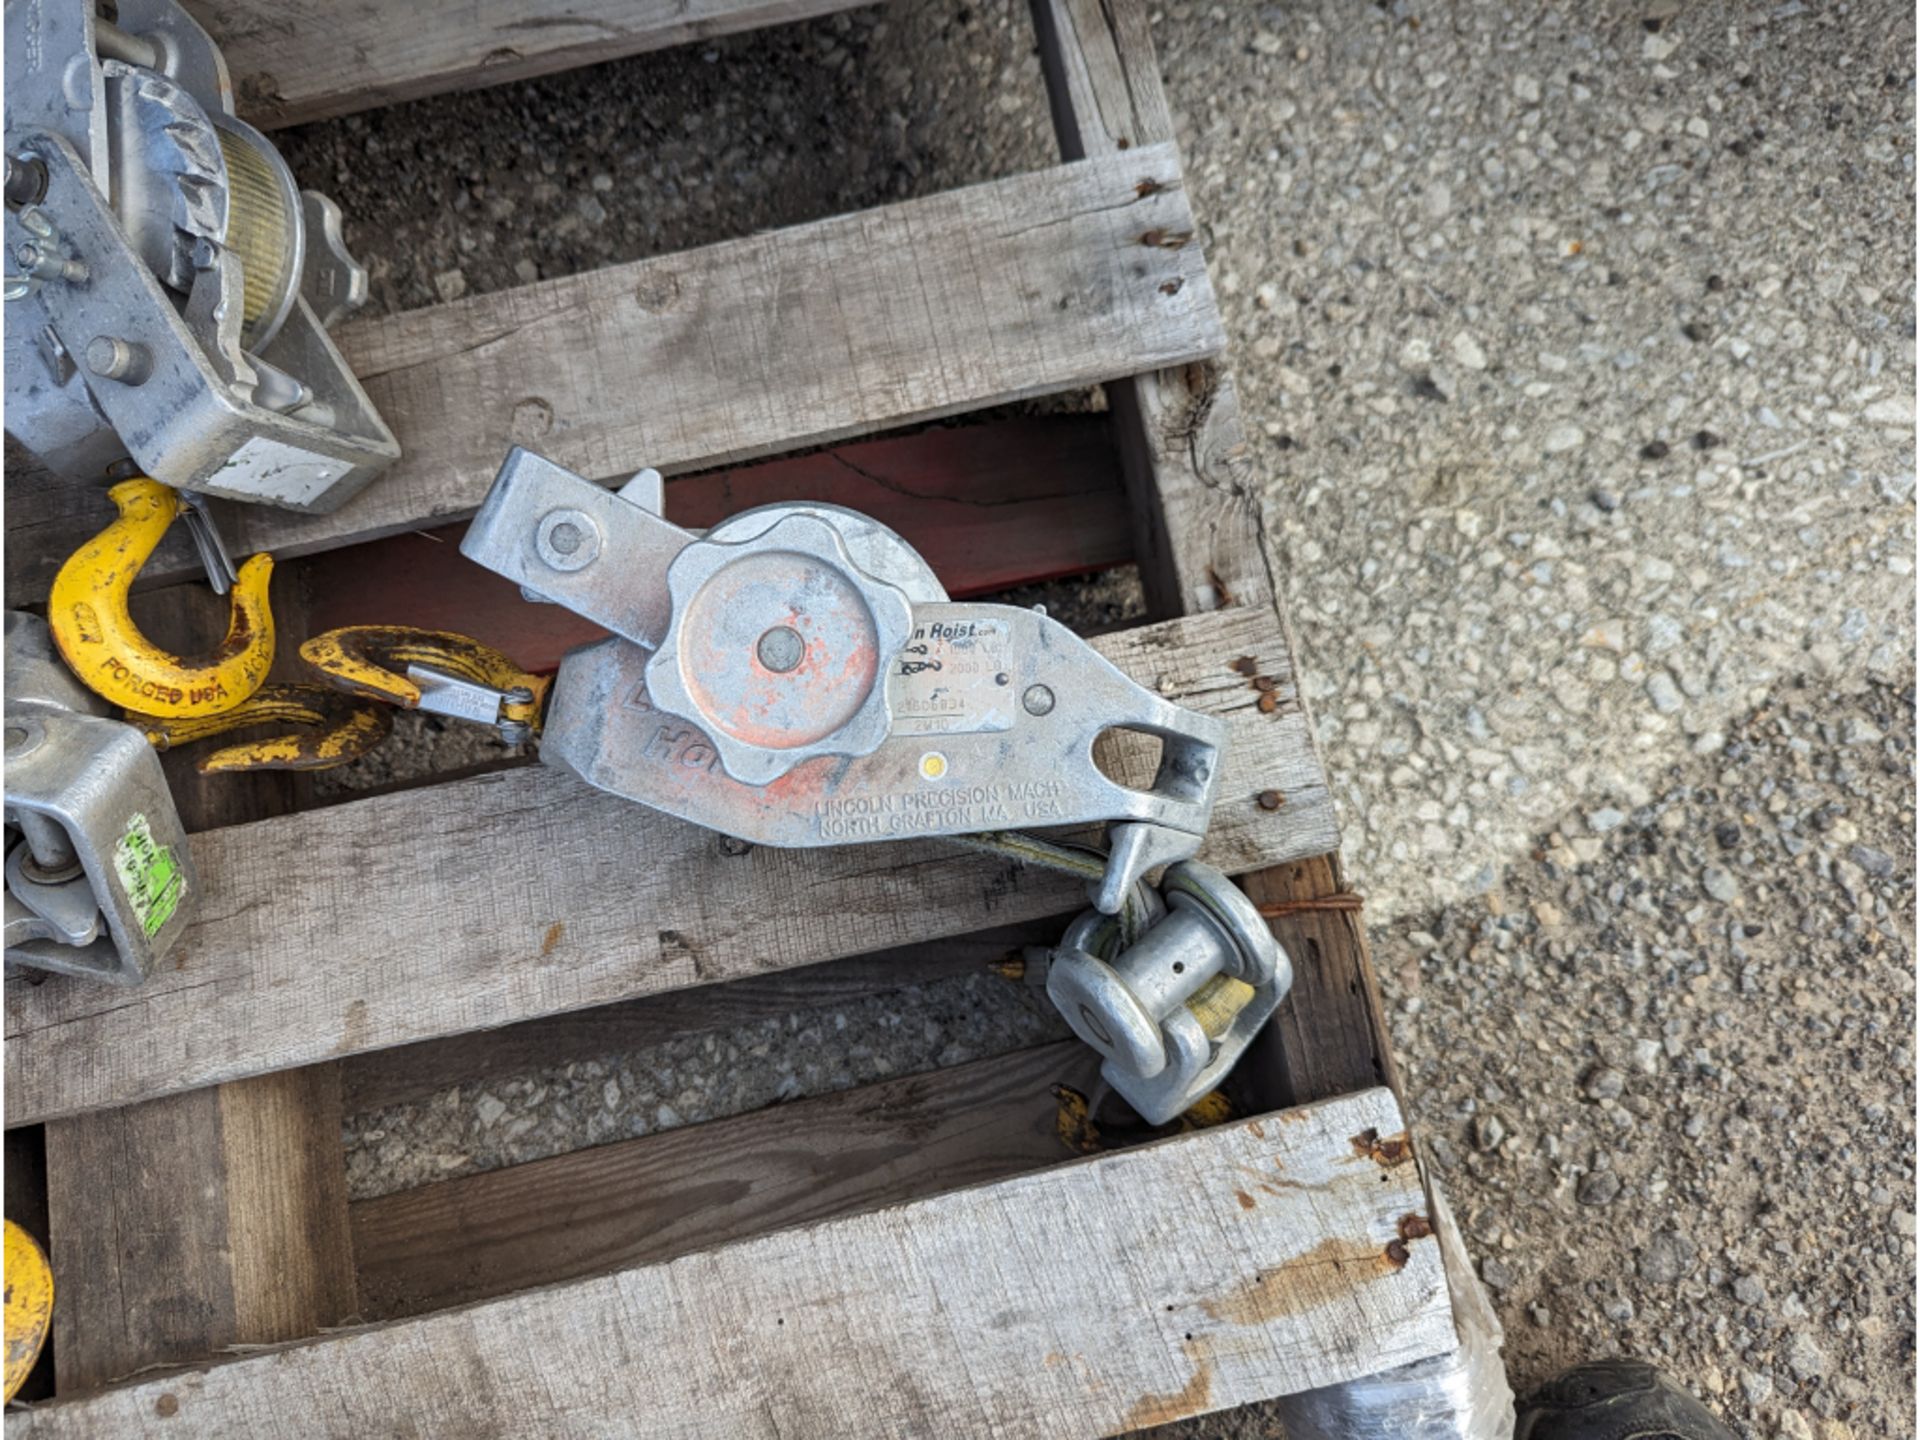 (7) LINCOLN 2W10 WEB HOIST RATCHET WINCH STRAP PULLER ELECTRIC UTILITY INDUSTRY 1000-2000LB SURPLUS - Image 3 of 7